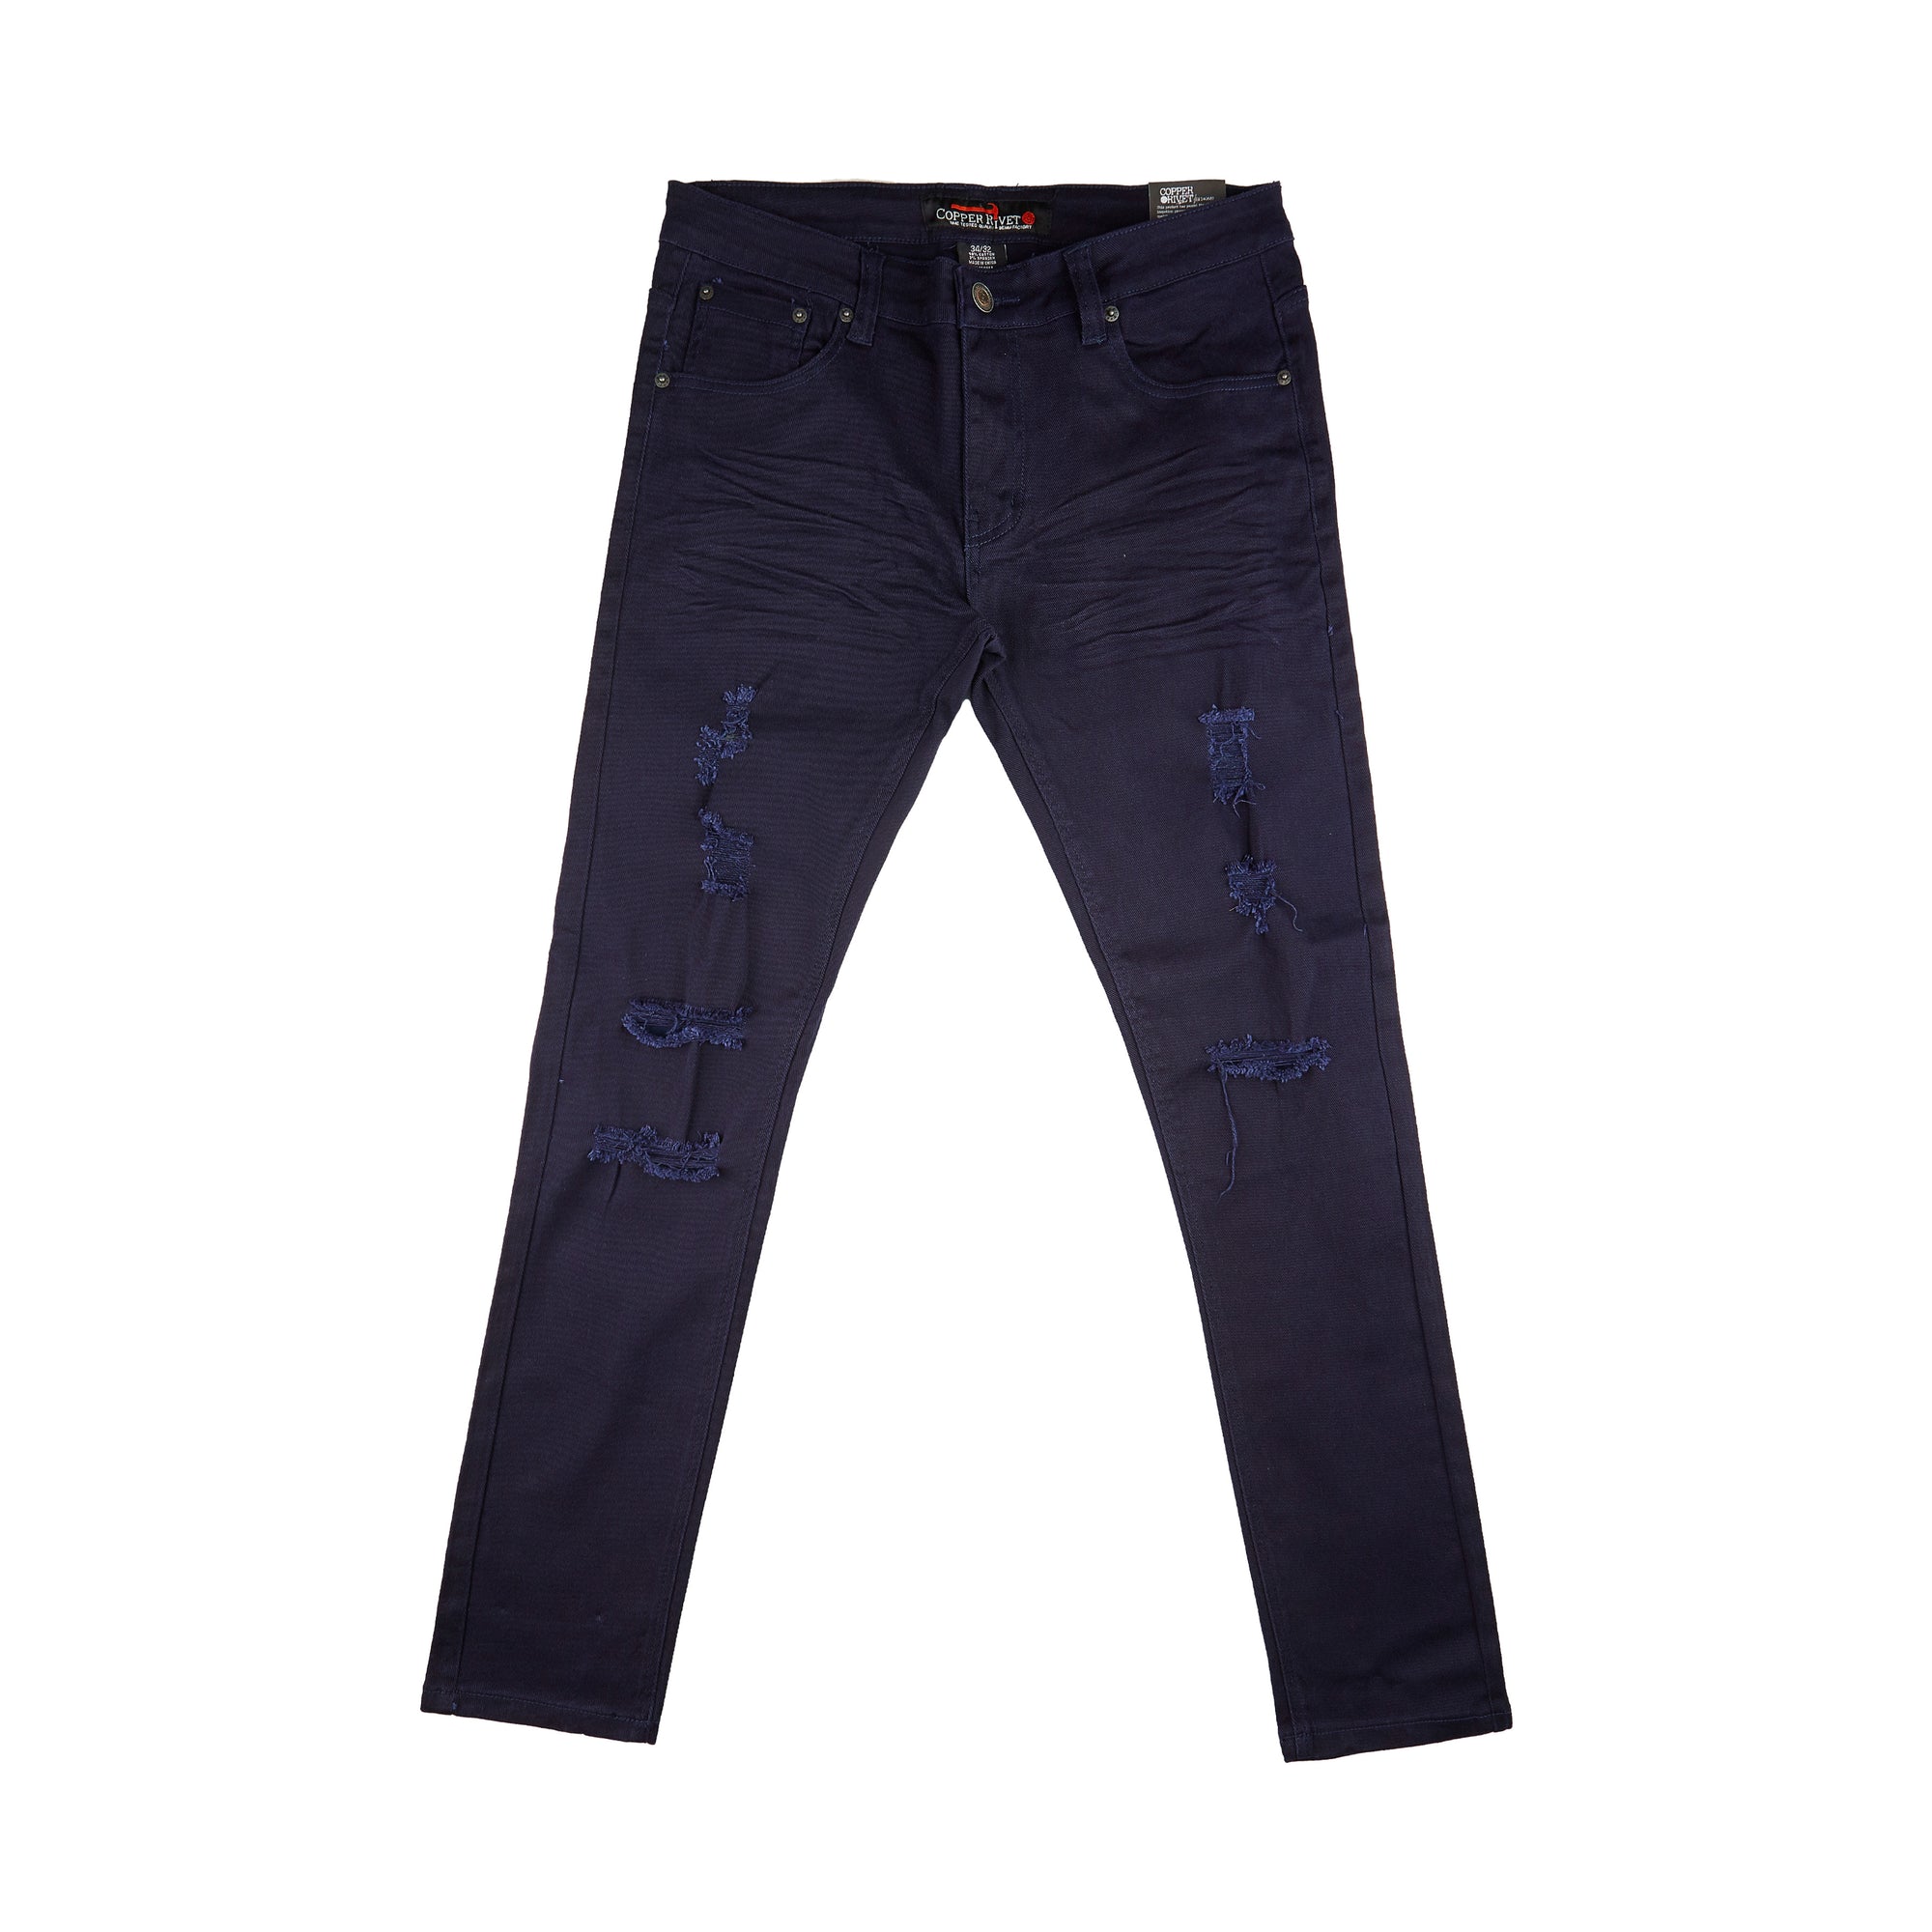 Basic Twill Ripped Jean Pants (Navy)